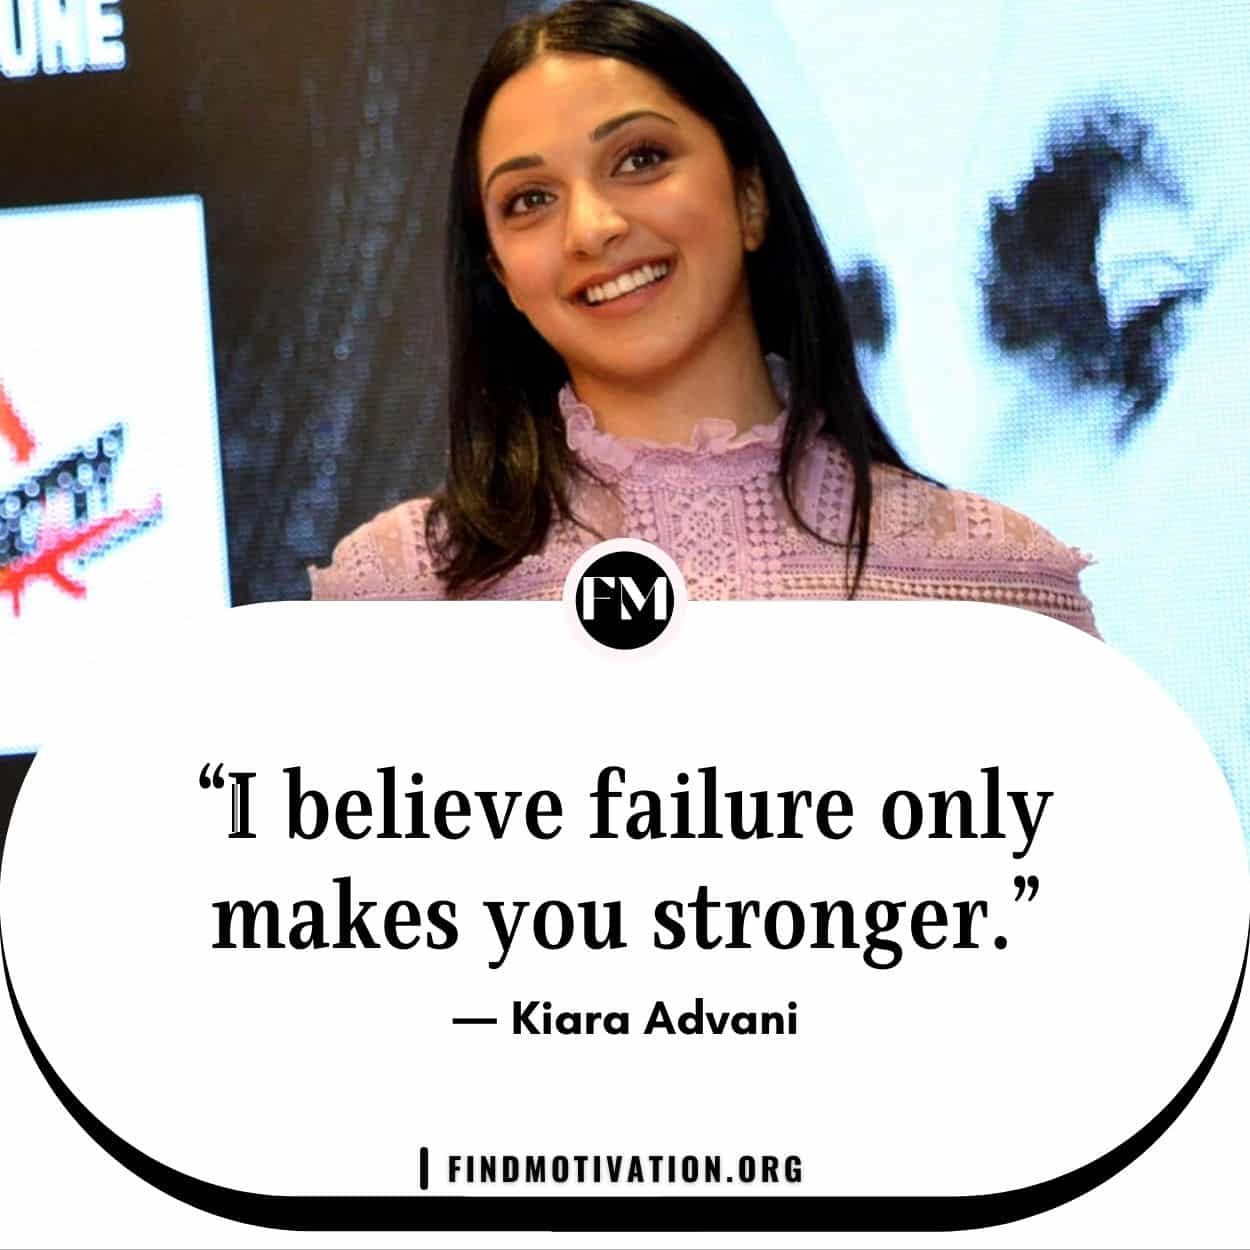 Kiara Advani motivational quotes on how to love your work